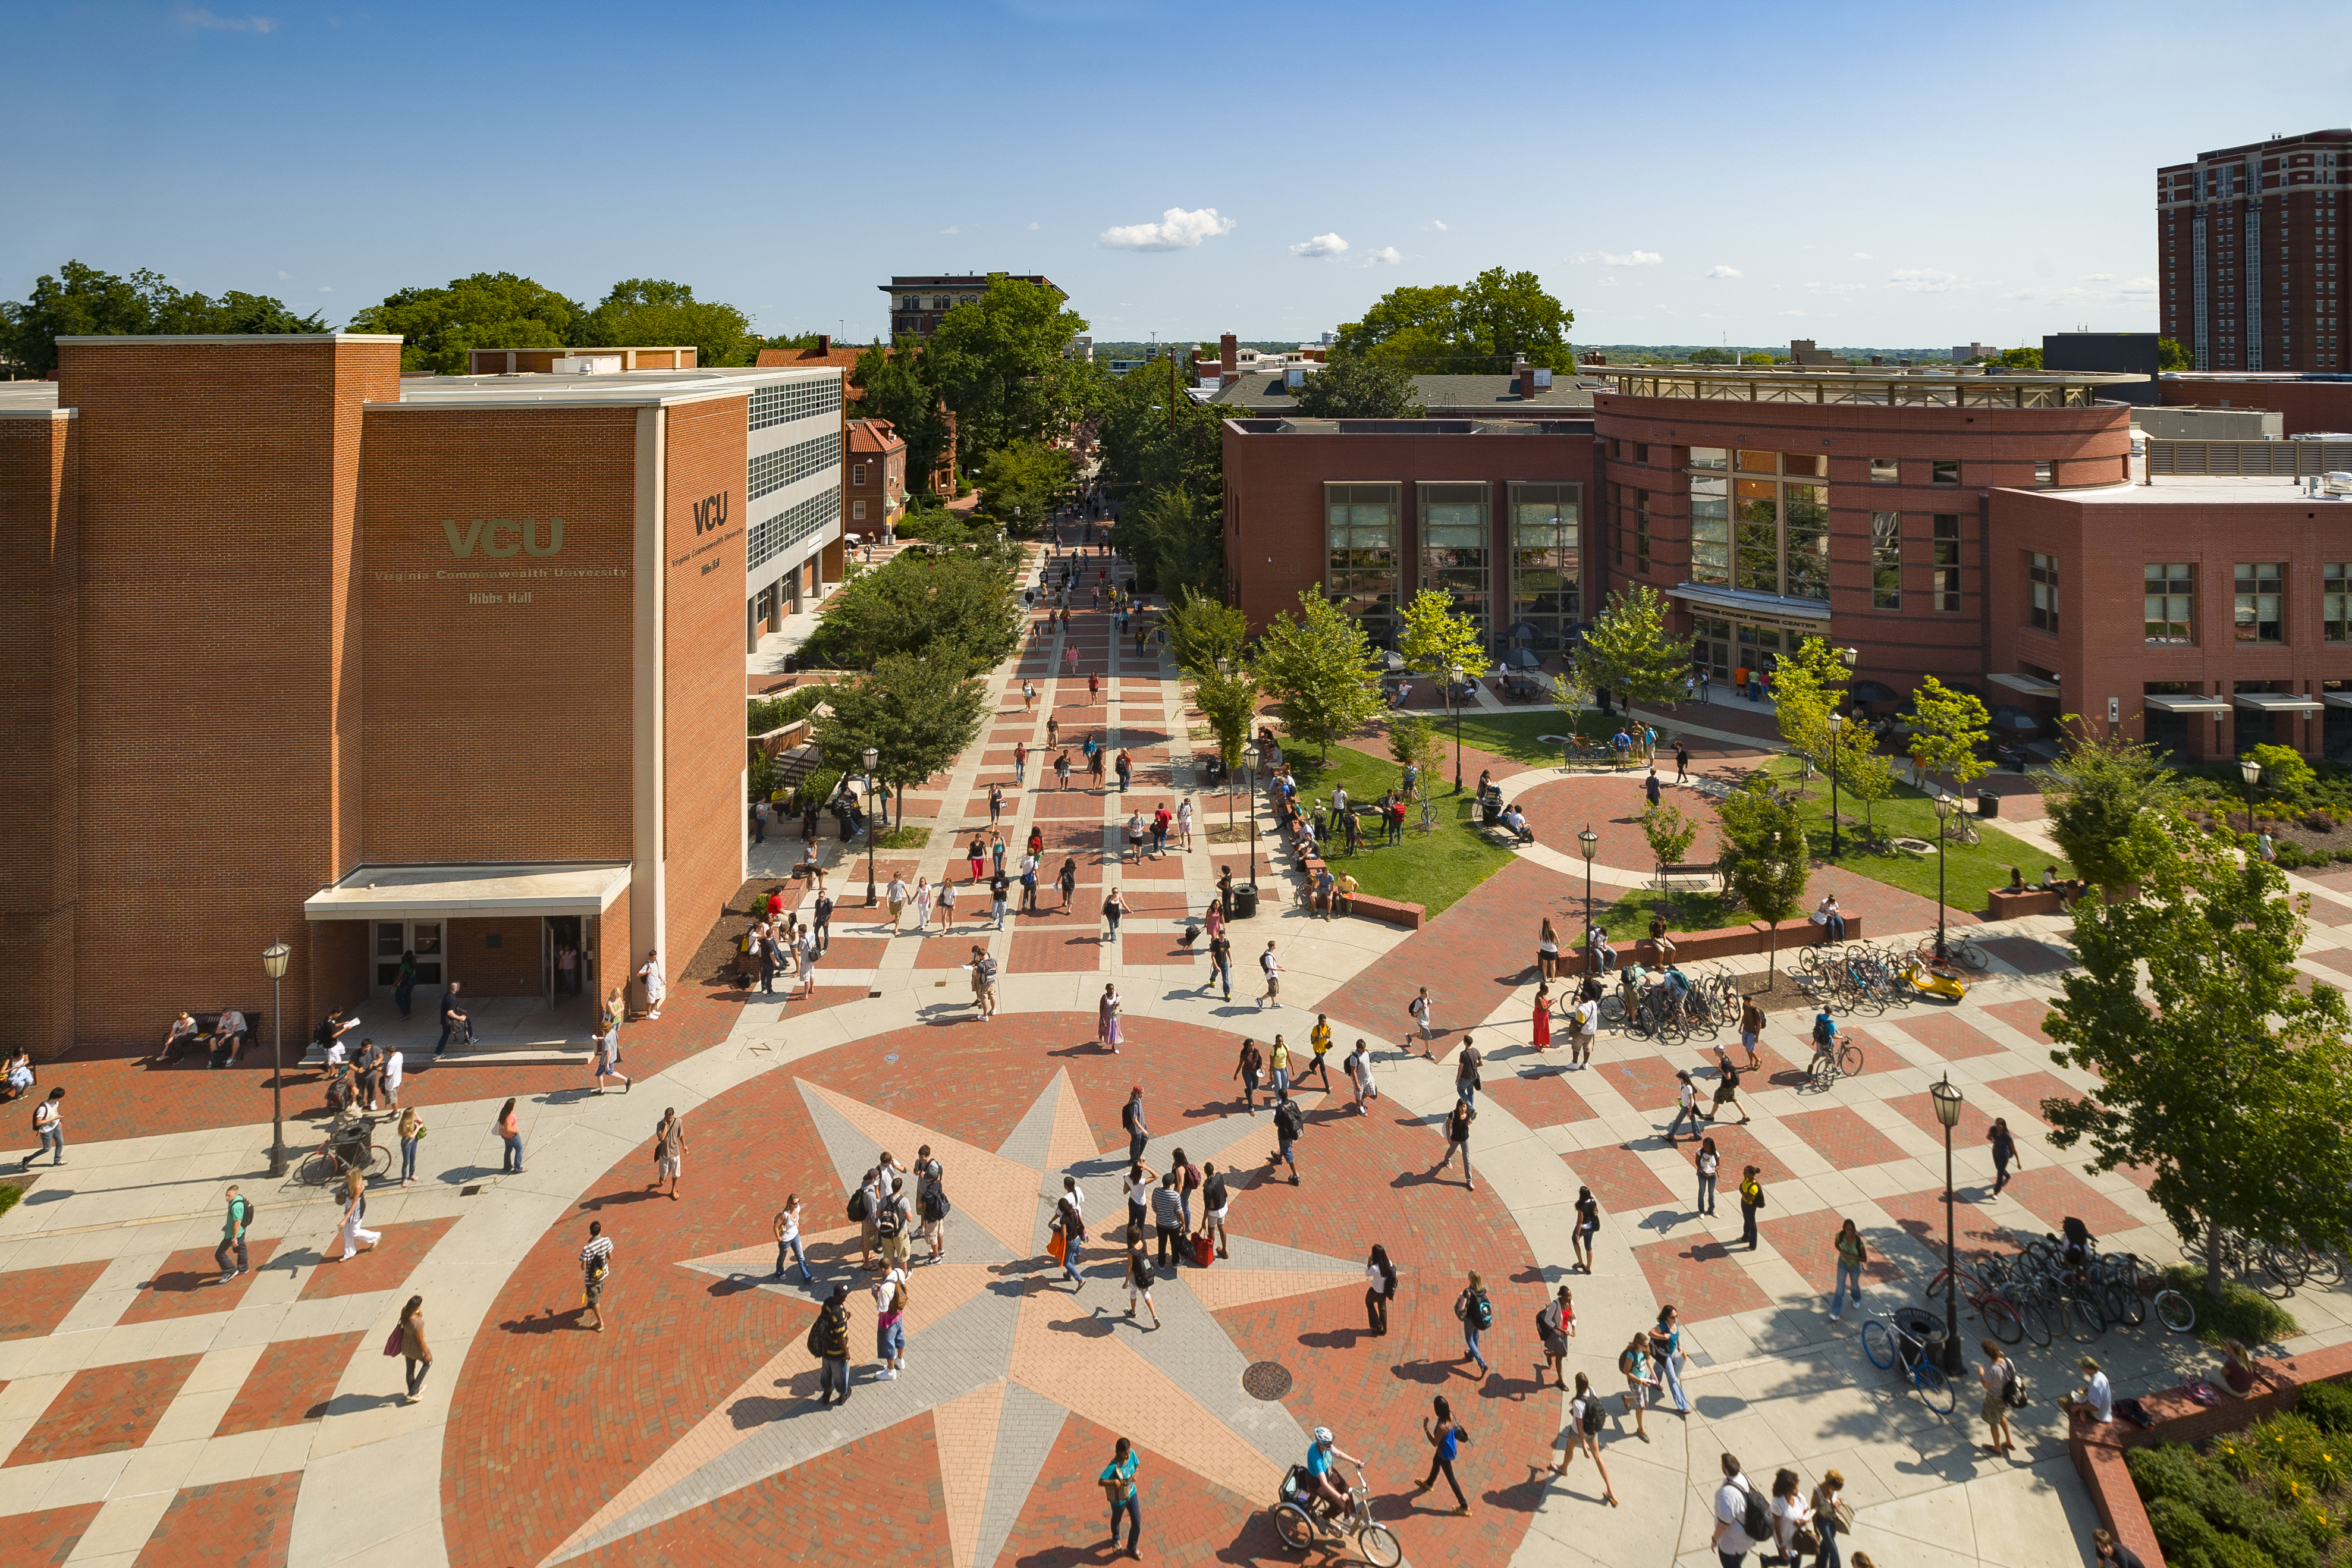 Aerial view of campus with people walking and VCU buildings